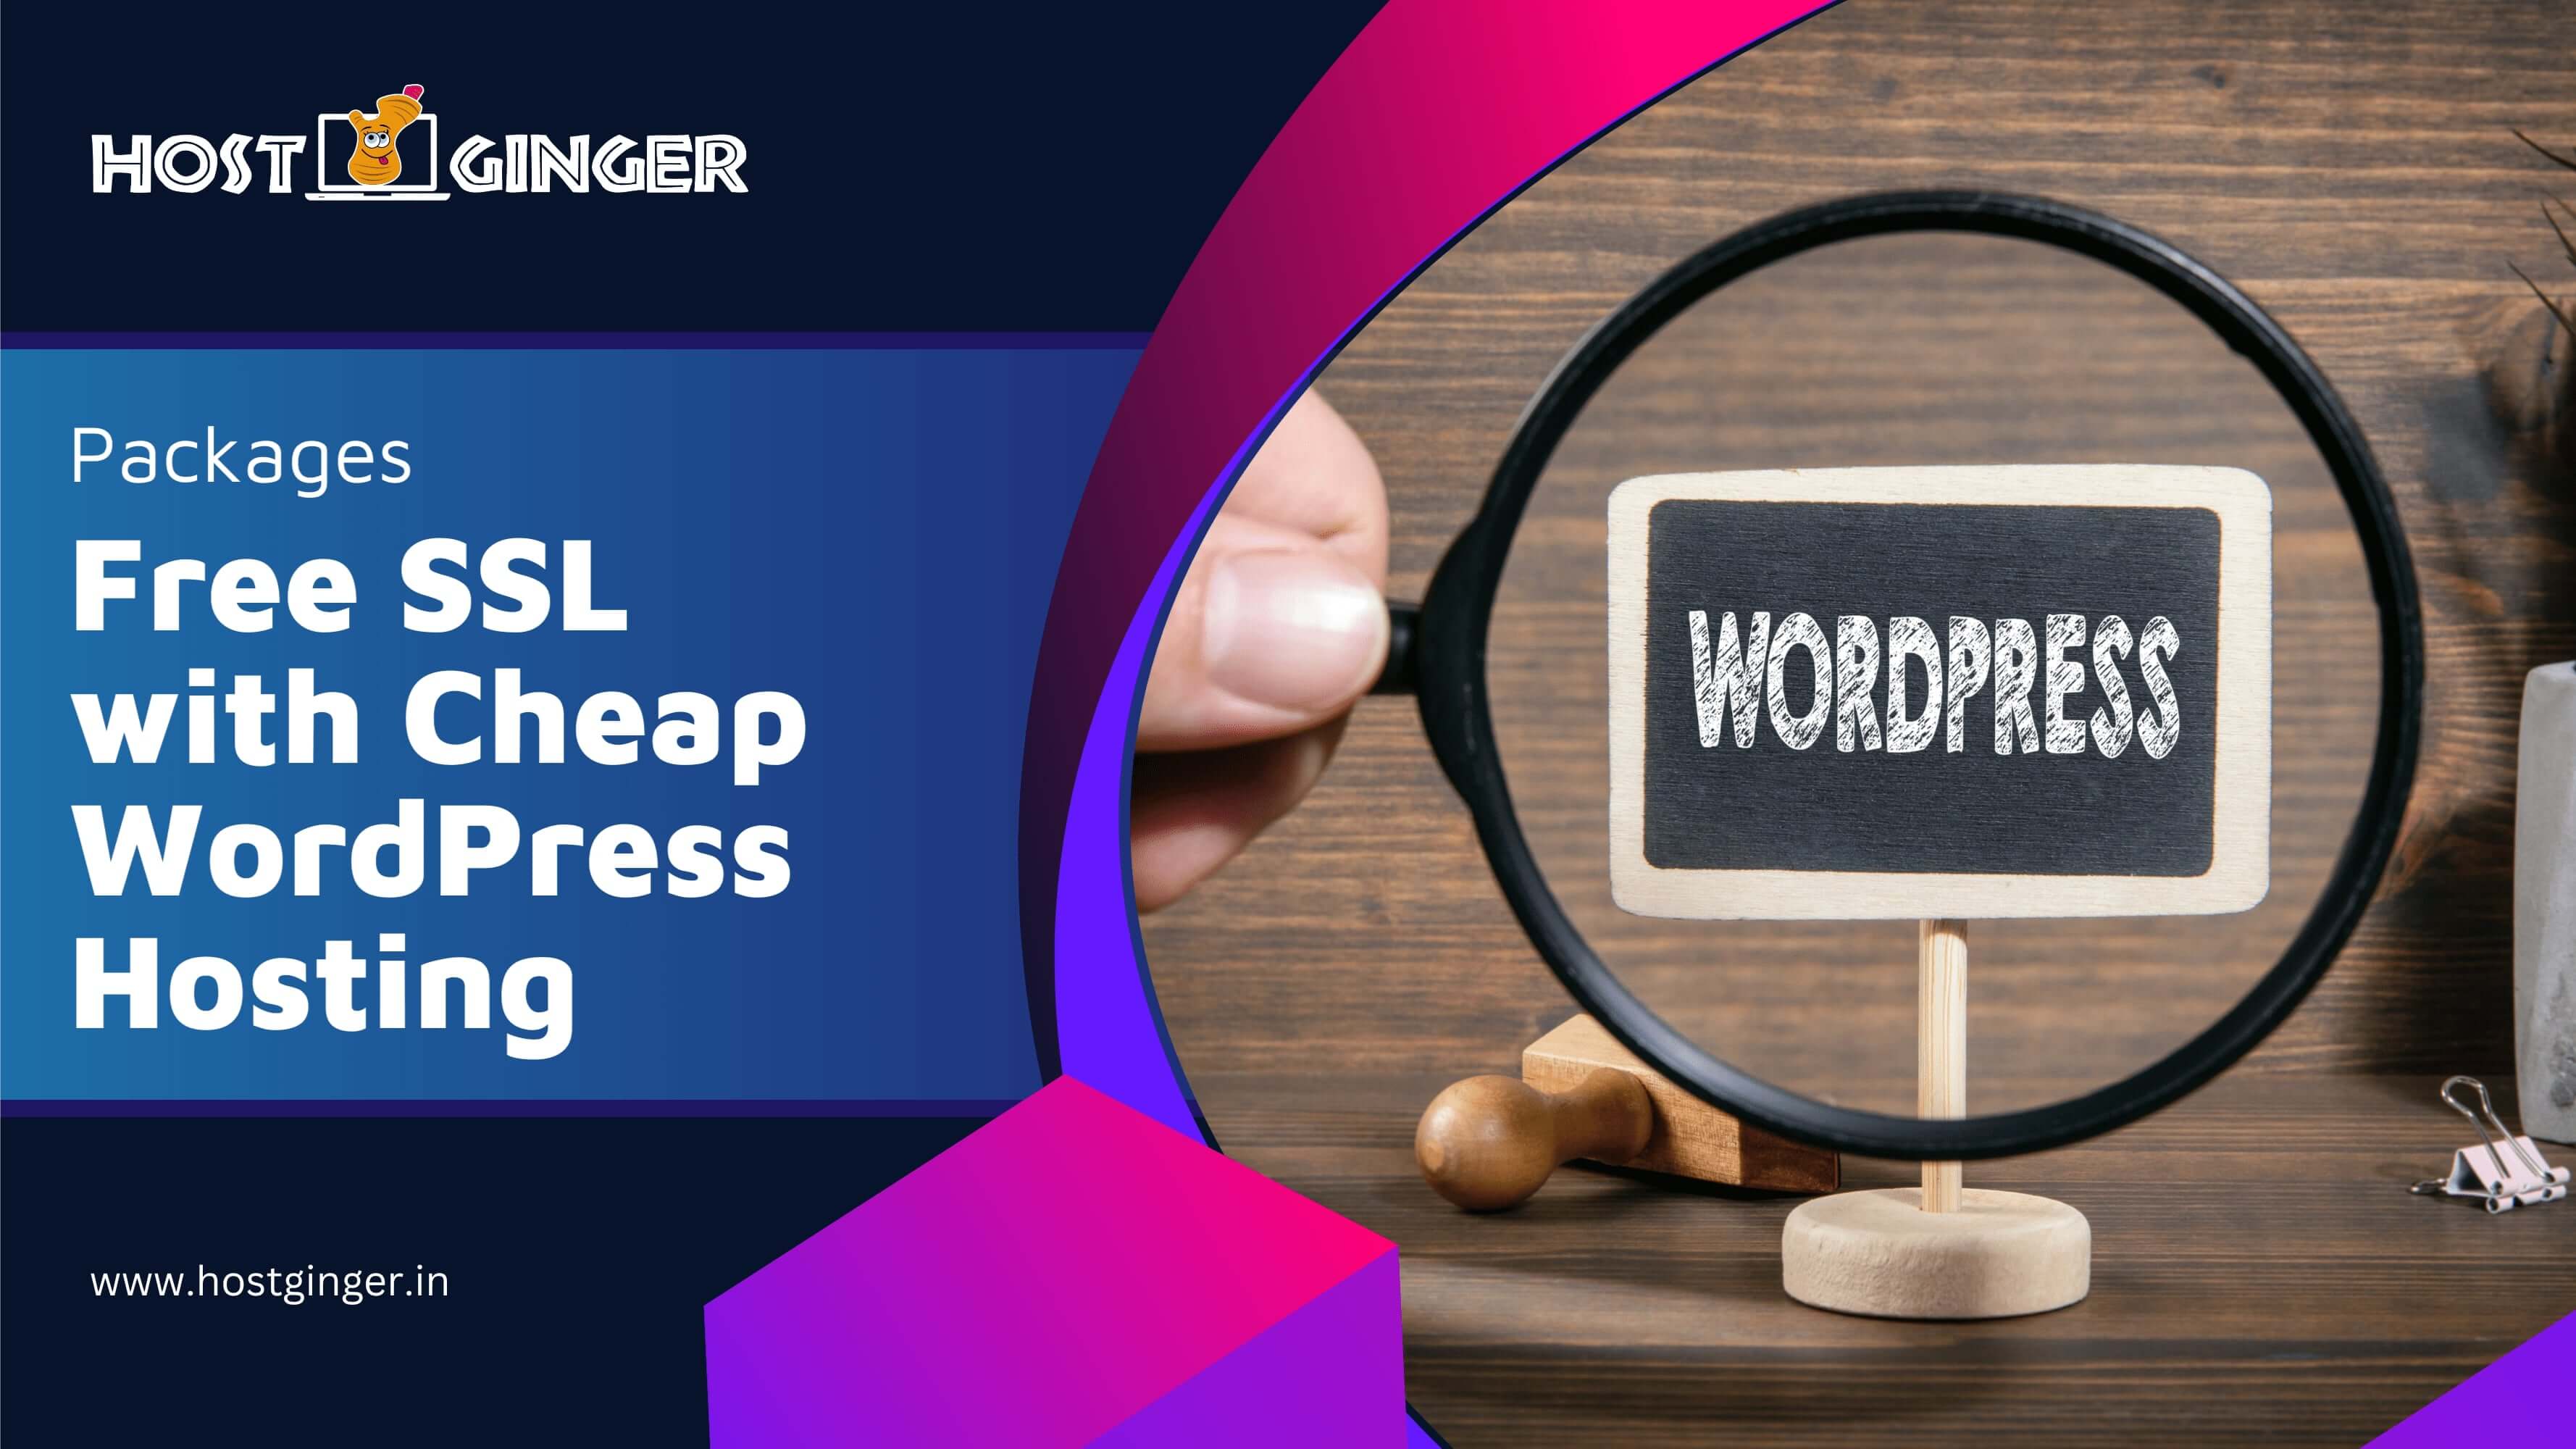 Free SSL with Cheap WordPress Hosting Packages